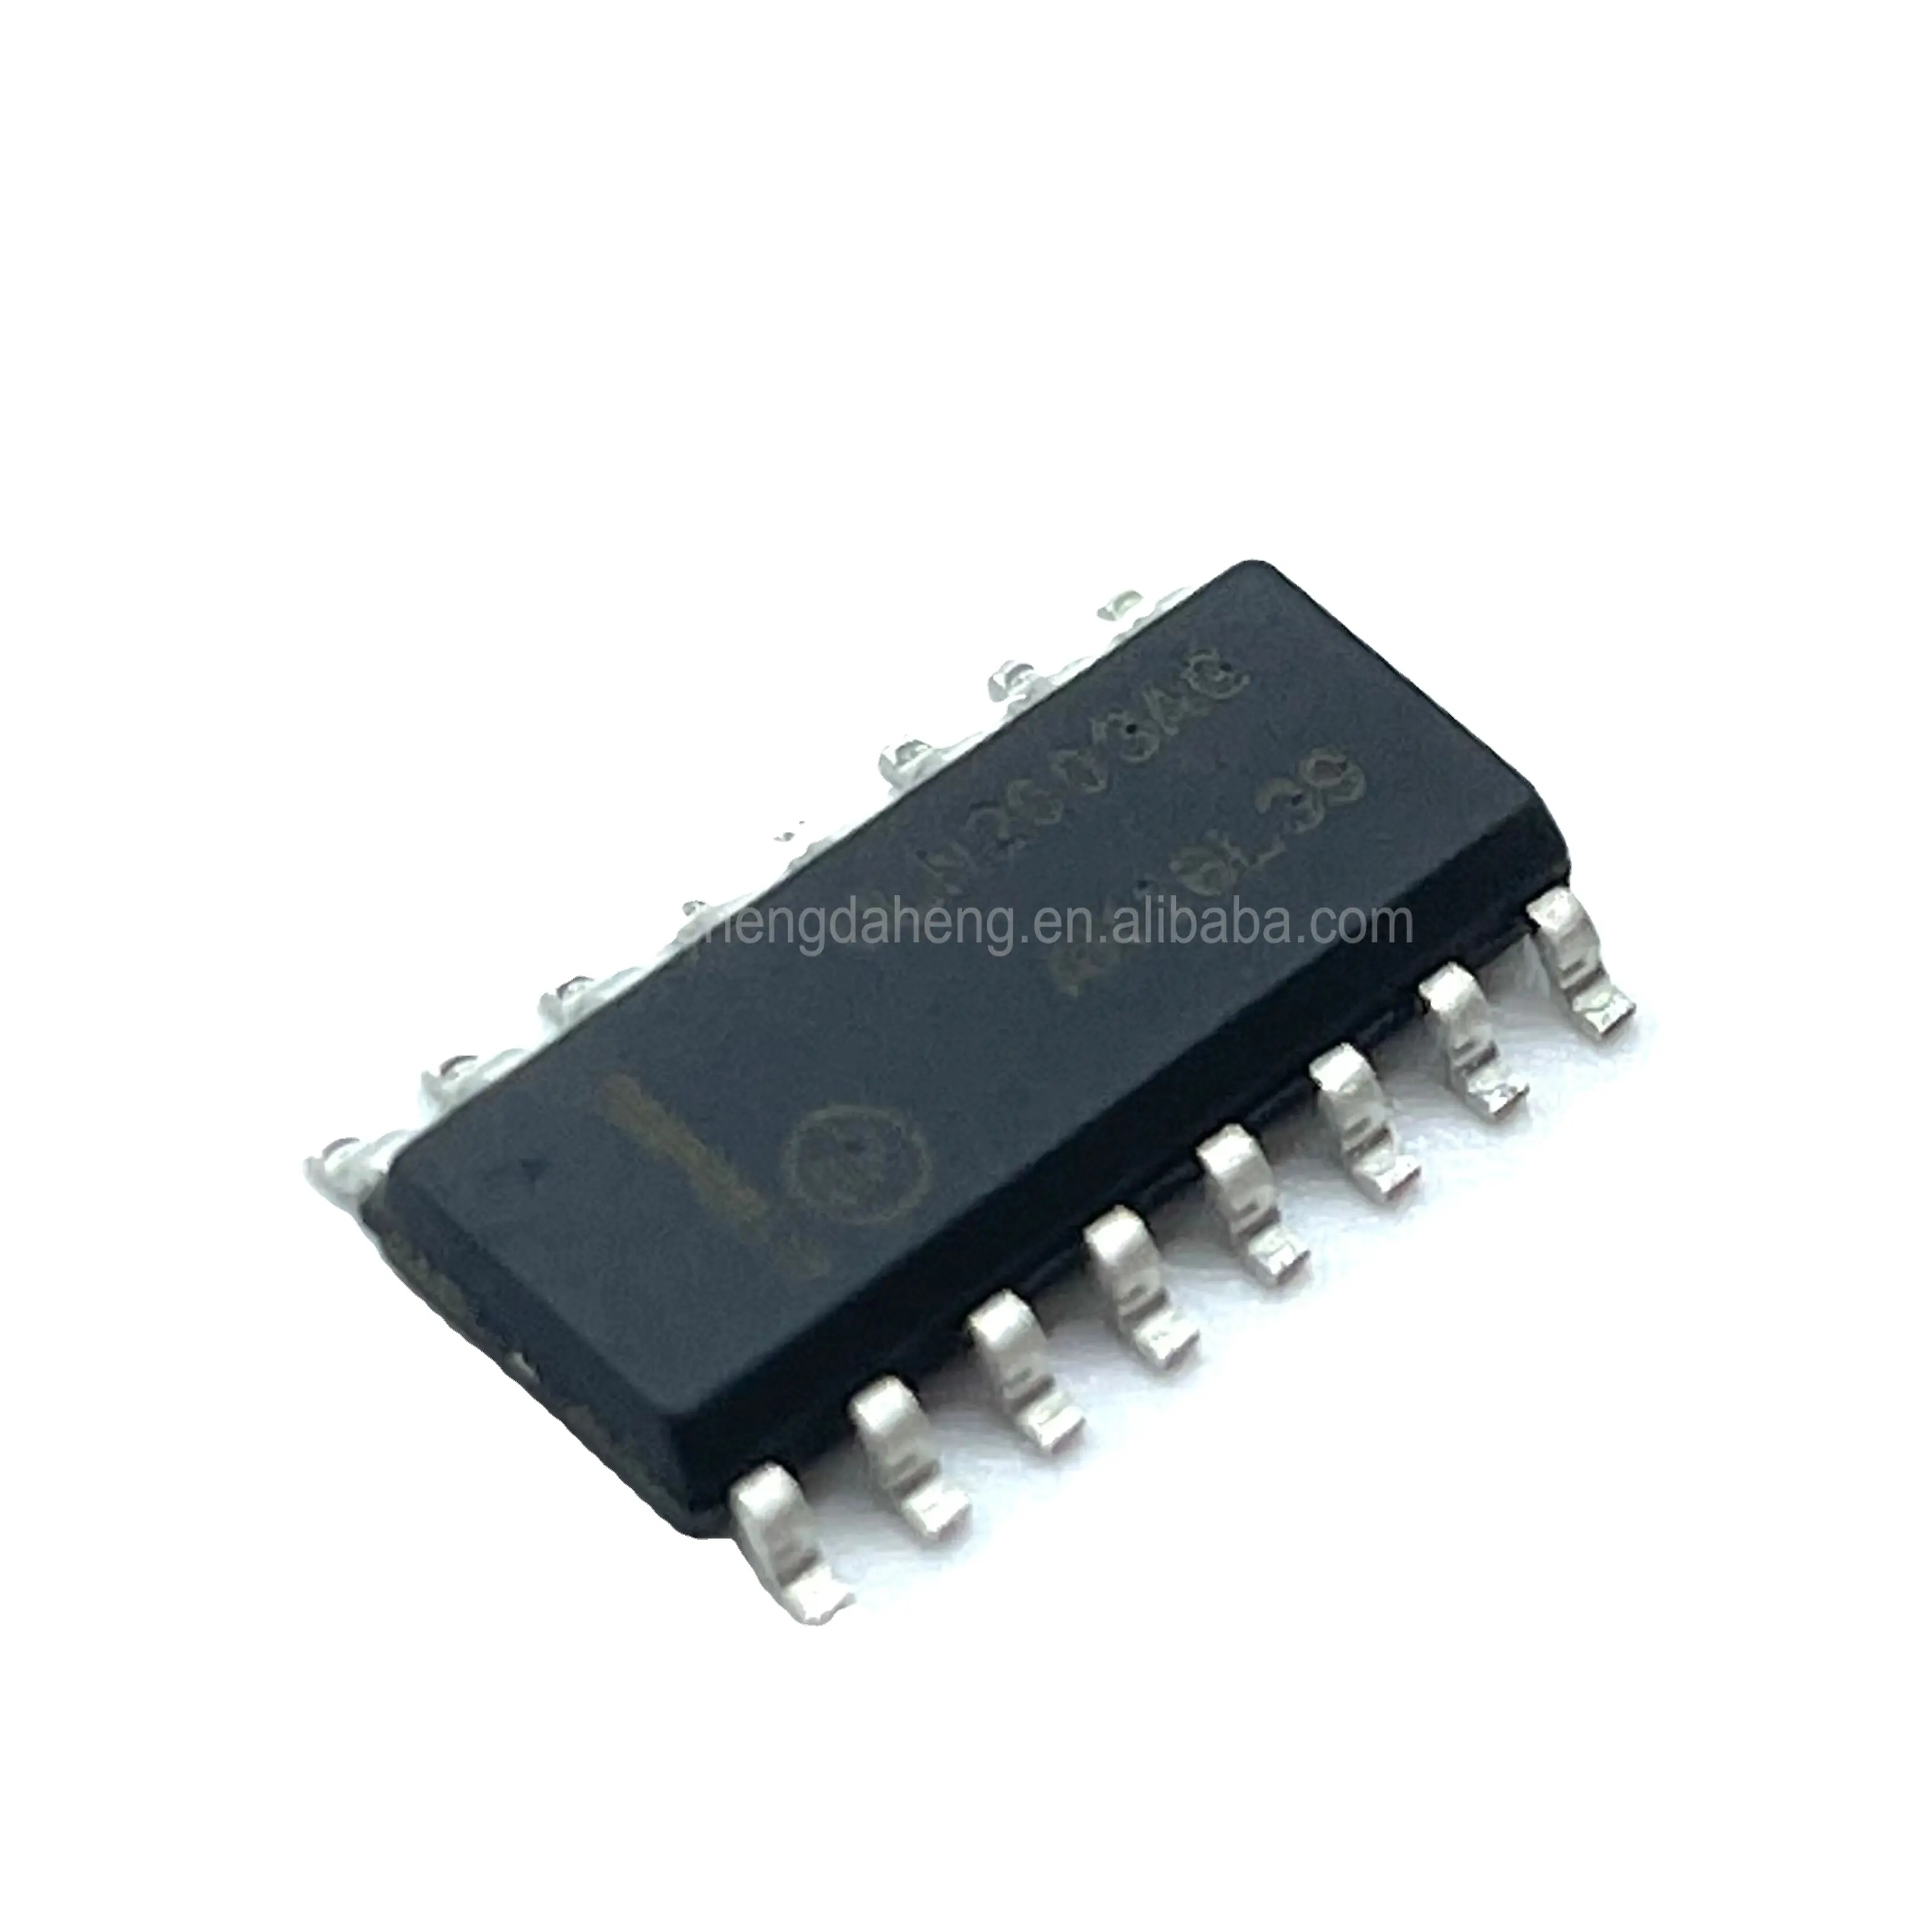 ZS-IC Power Management Power Distribution Switches Load Drivers TRANS 7NPN DARL 50V 0.5A 16SOIC ULN2003ADR2G